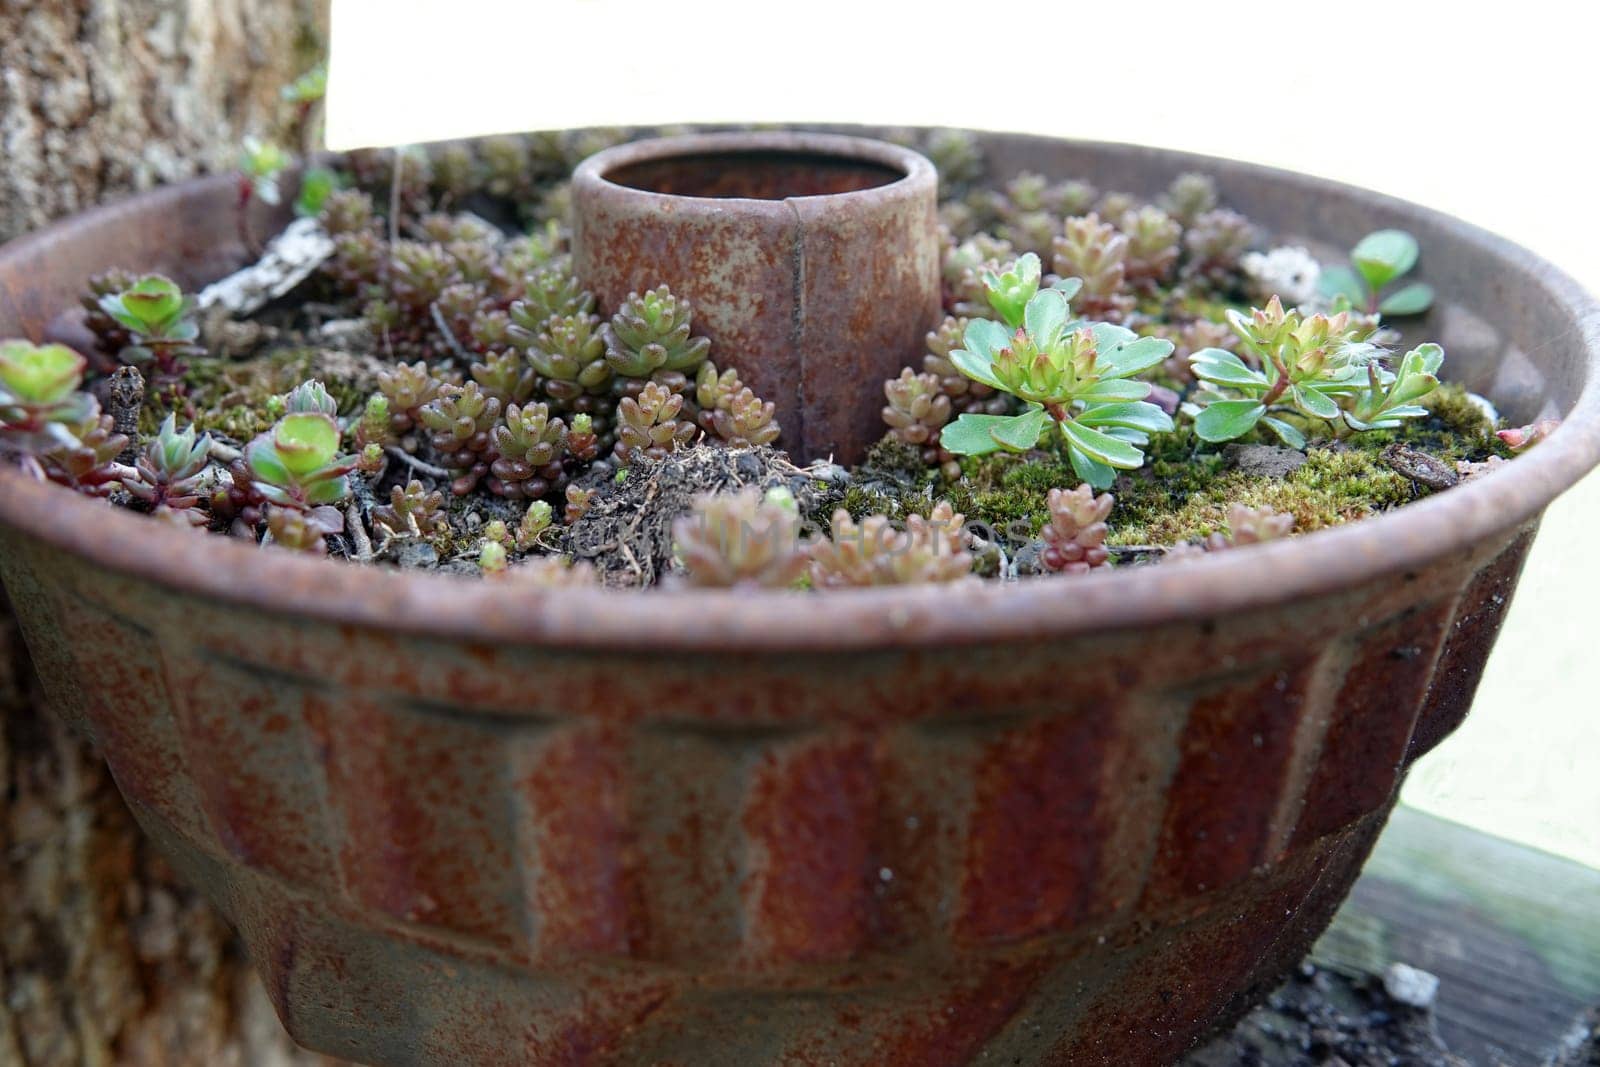 Alternative flower pot. An old rusty turban baking tin with succulents in it